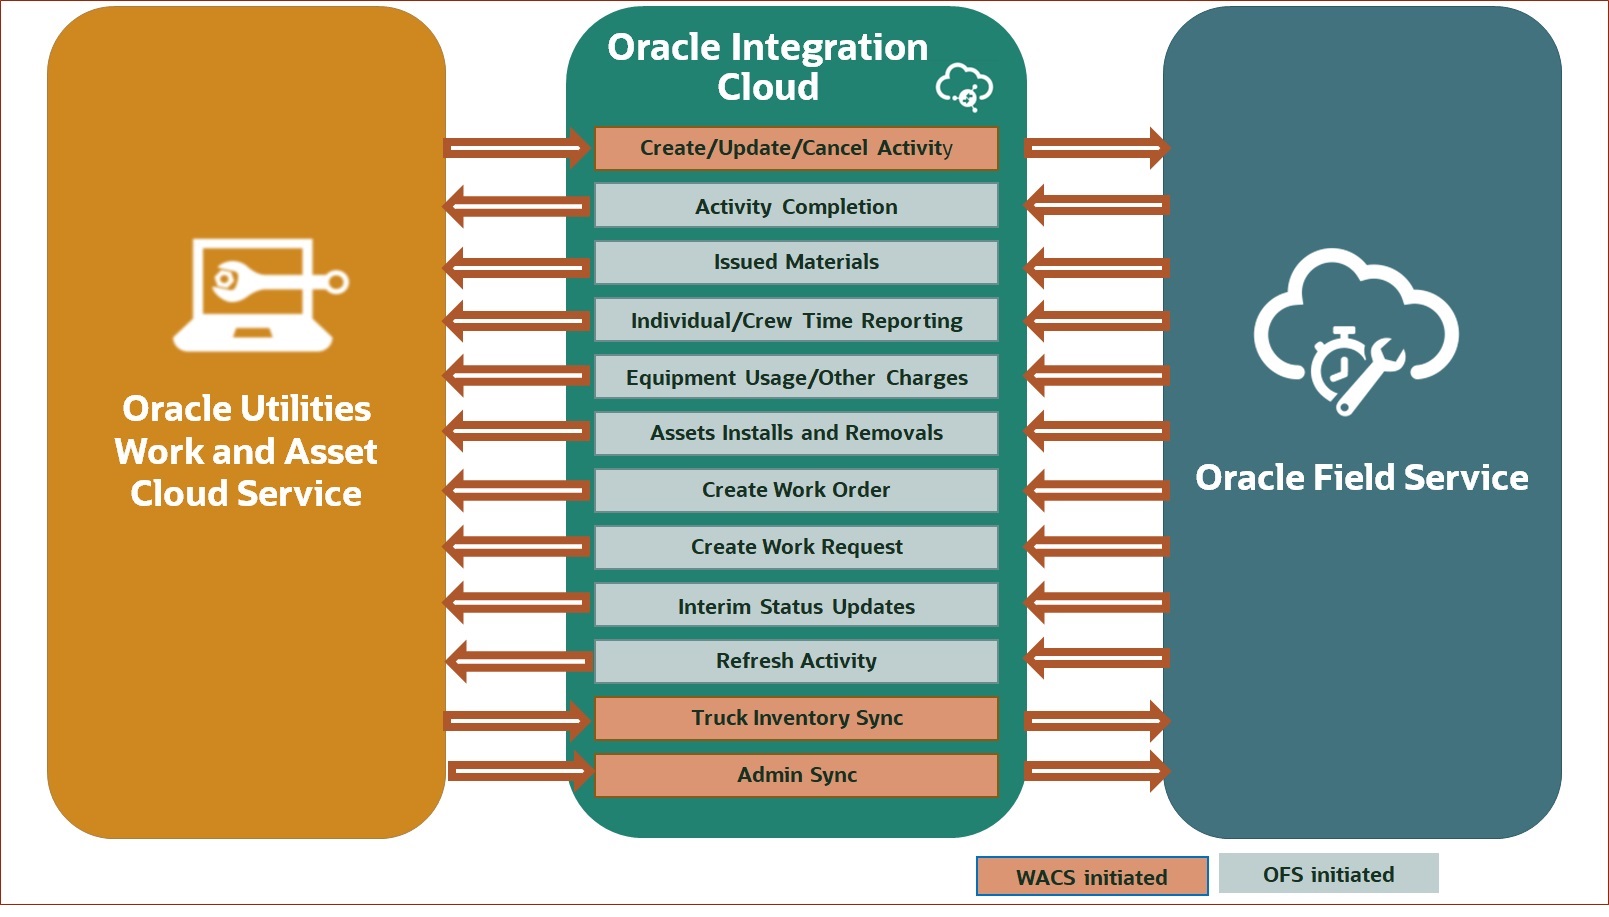 Illustrates the business processes supported in this integration product.